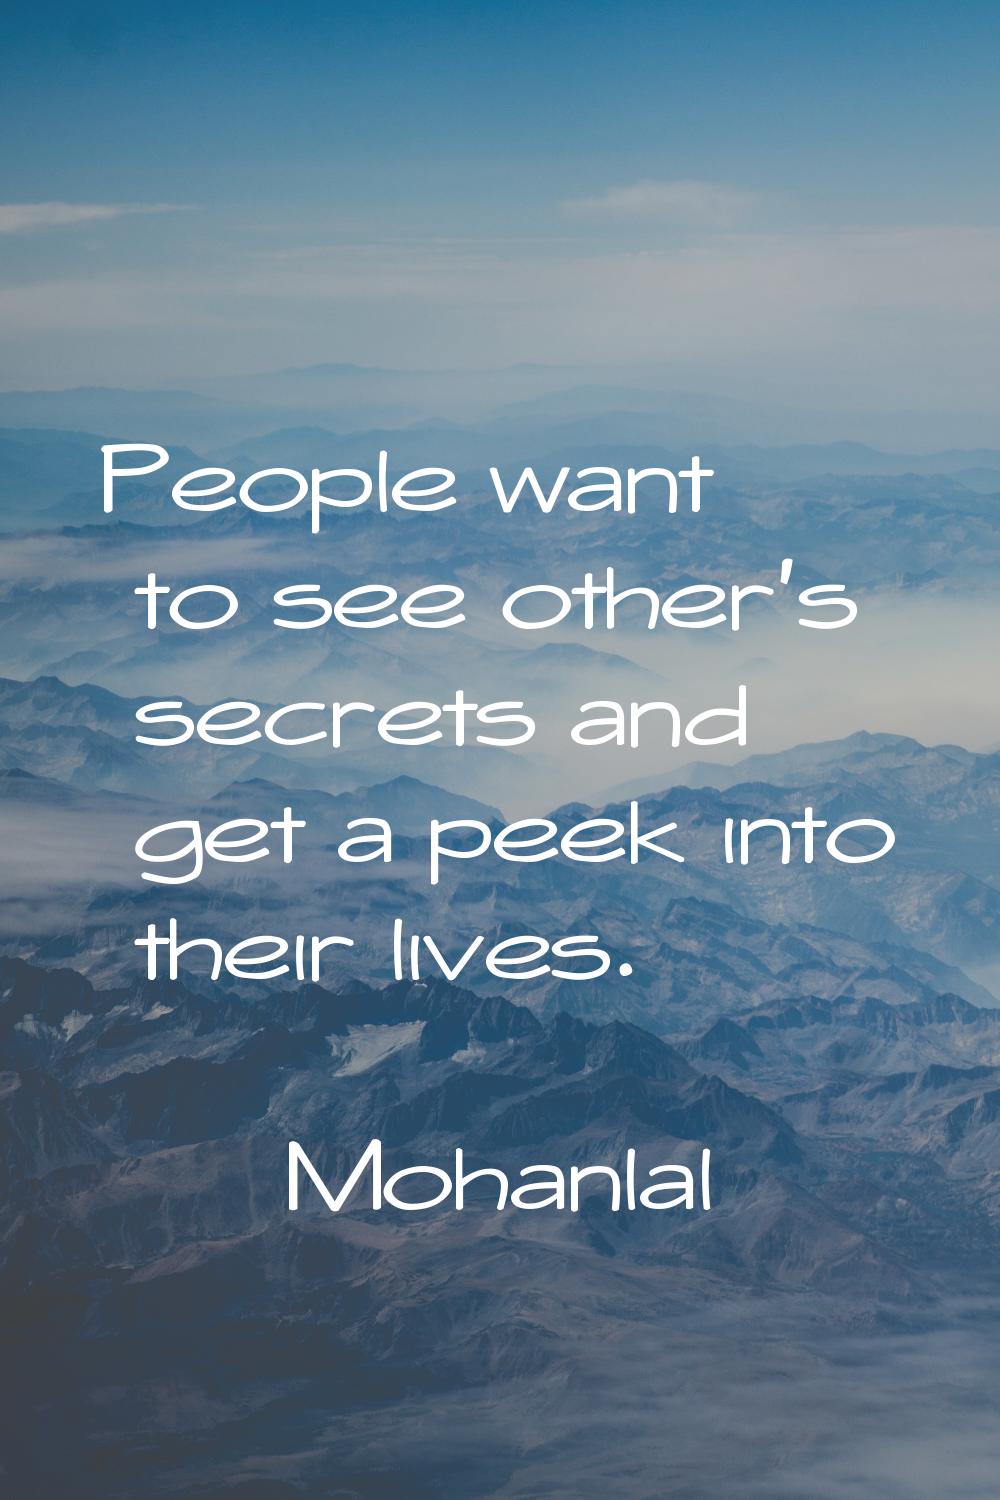 People want to see other's secrets and get a peek into their lives.